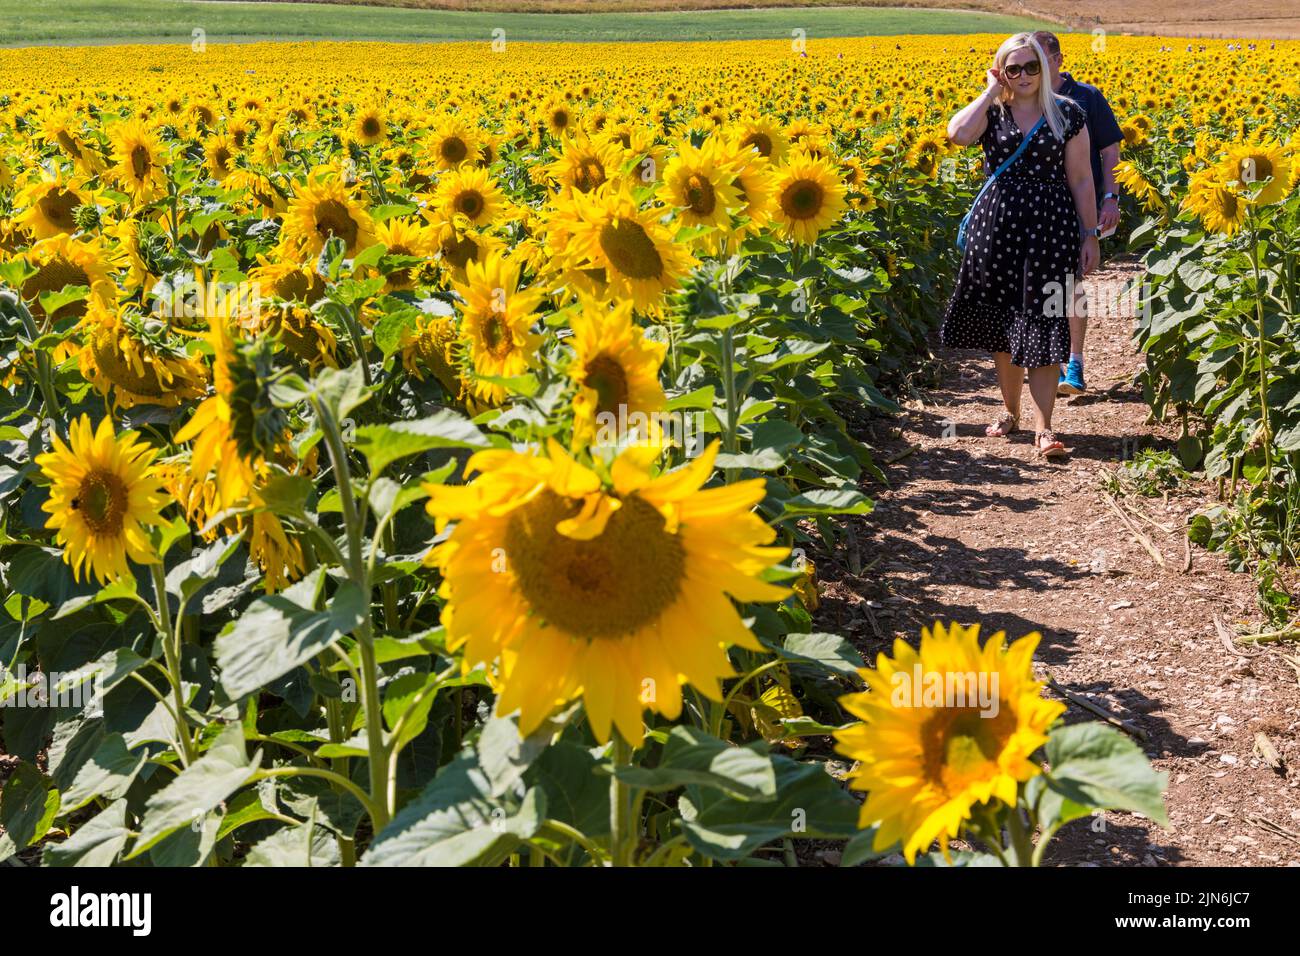 Maiden Castle Farm, Dorchester, Dorset UK. 9th August 2022. Visitors flock to Maiden Castle Farm, near Dorchester in Dorset, on a hot sunny day to walk the Dorset Sunflower Trail. The bright yellow sunflowers fortunately don't need regular watering so thrive in the sunshine and provide a cheery sight against the parched surroundings, with the contrasting yellow flowers against the blue sky as the heatwave continues. (permission received from Maiden Castle Farm).  Credit: Carolyn Jenkins/Alamy Live News Stock Photo